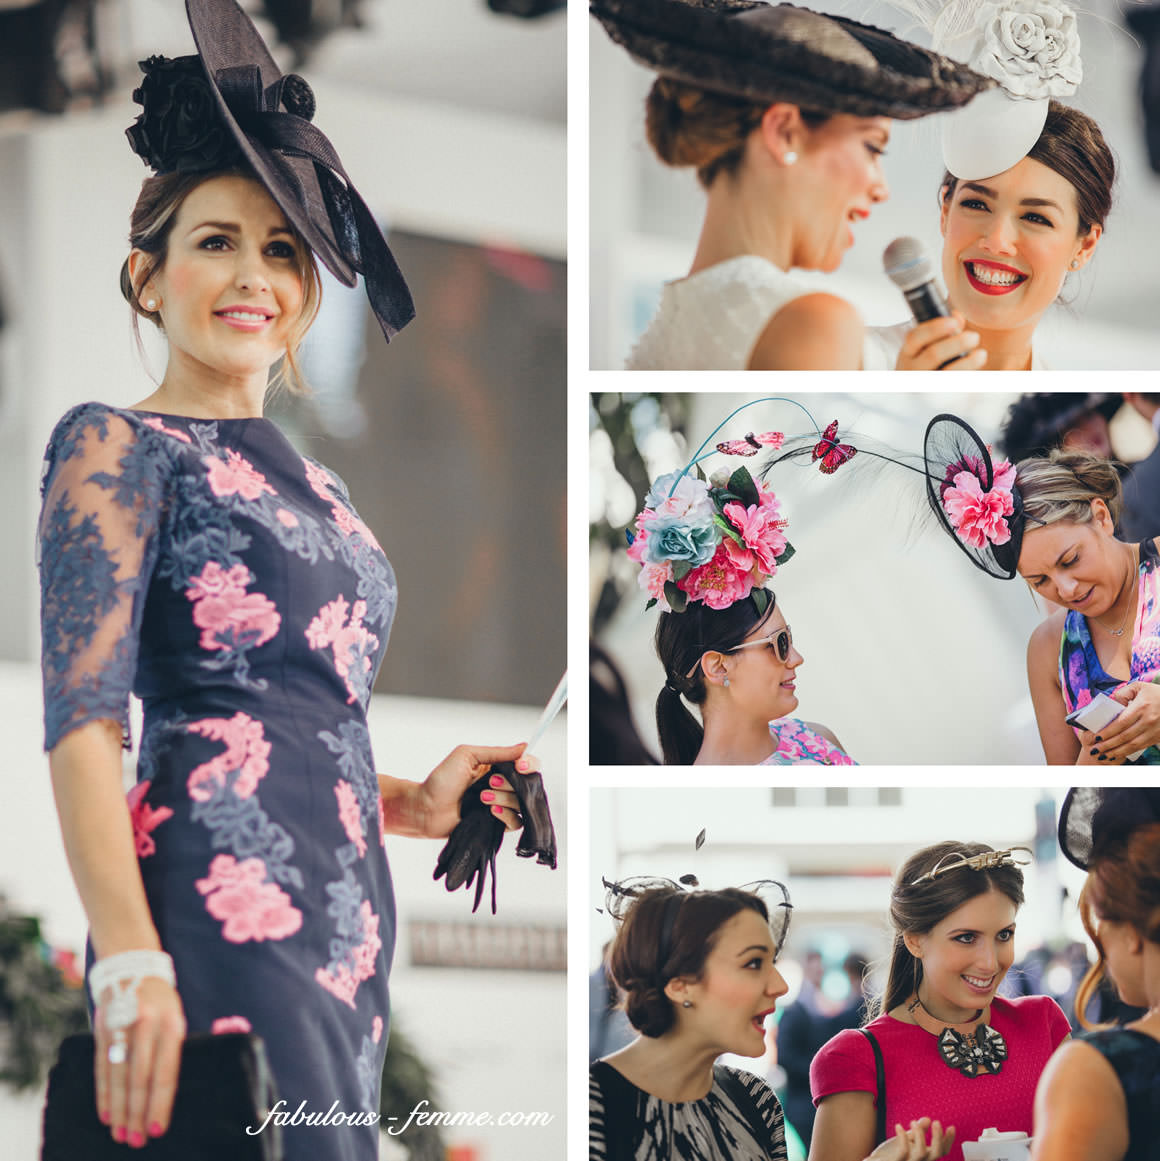 fashions on the field competition at the Cup in Melbourne